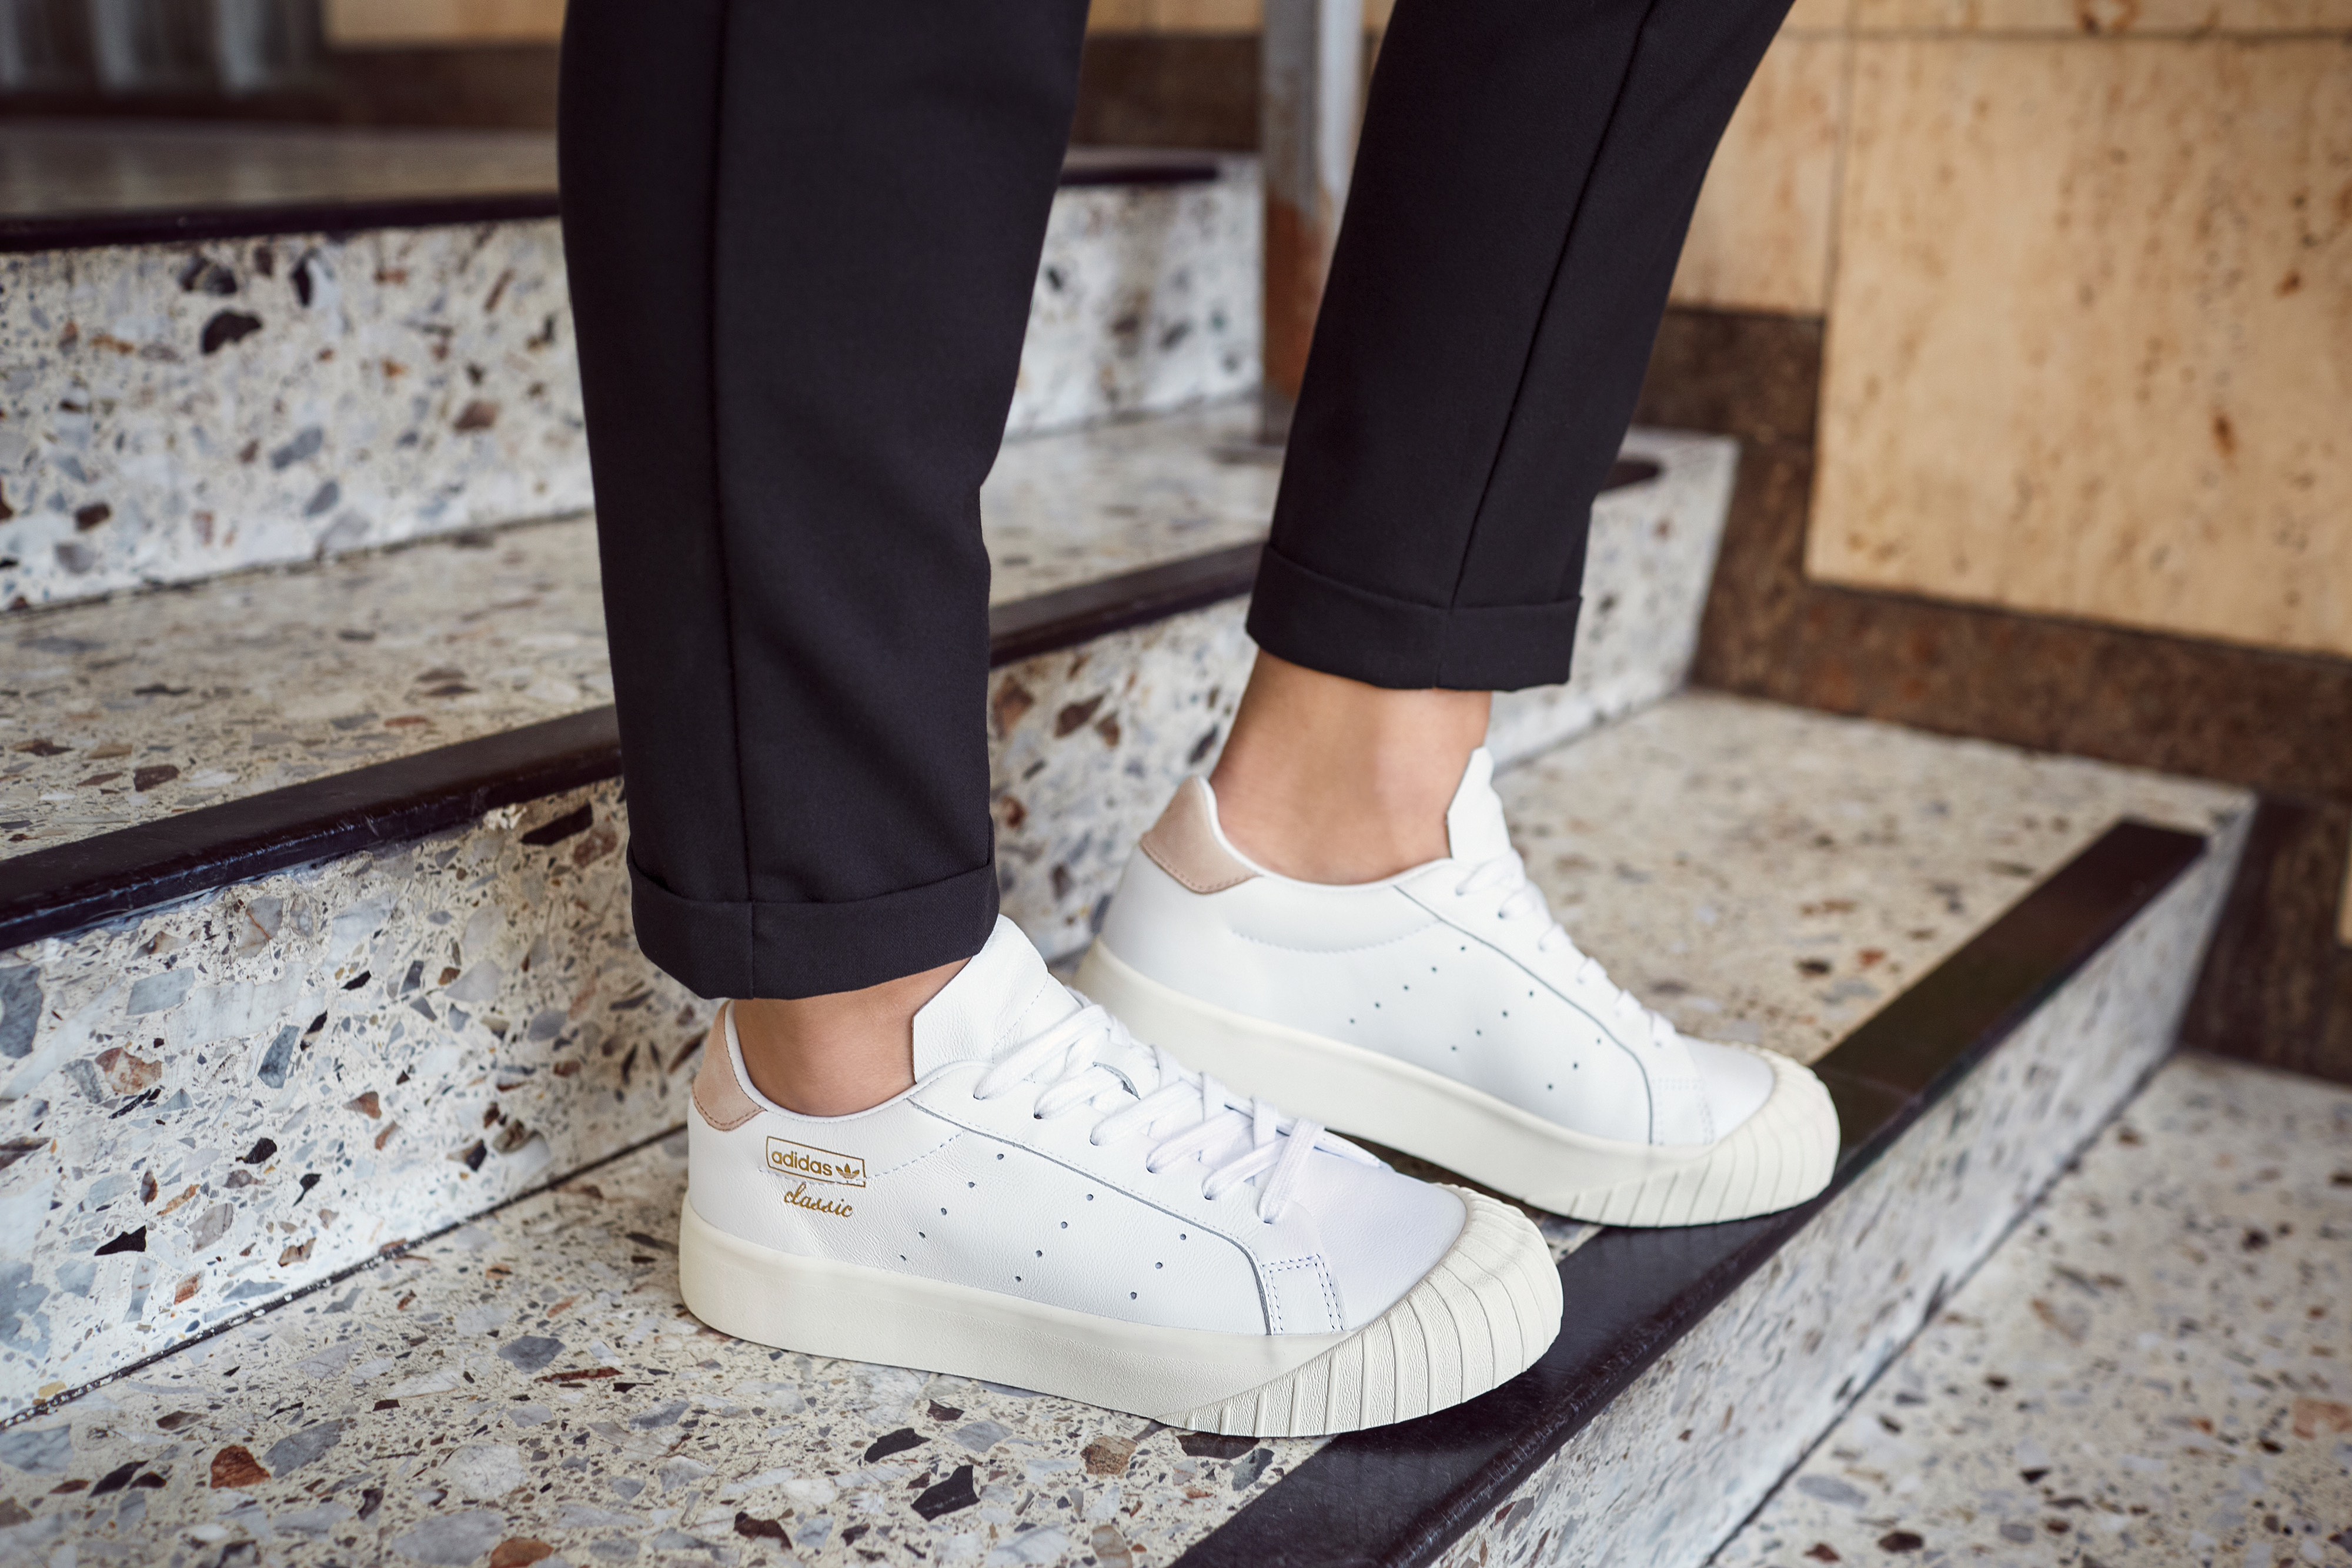 Meet the Newest Silhouette for Women: the adidas Everyn - WearTesters